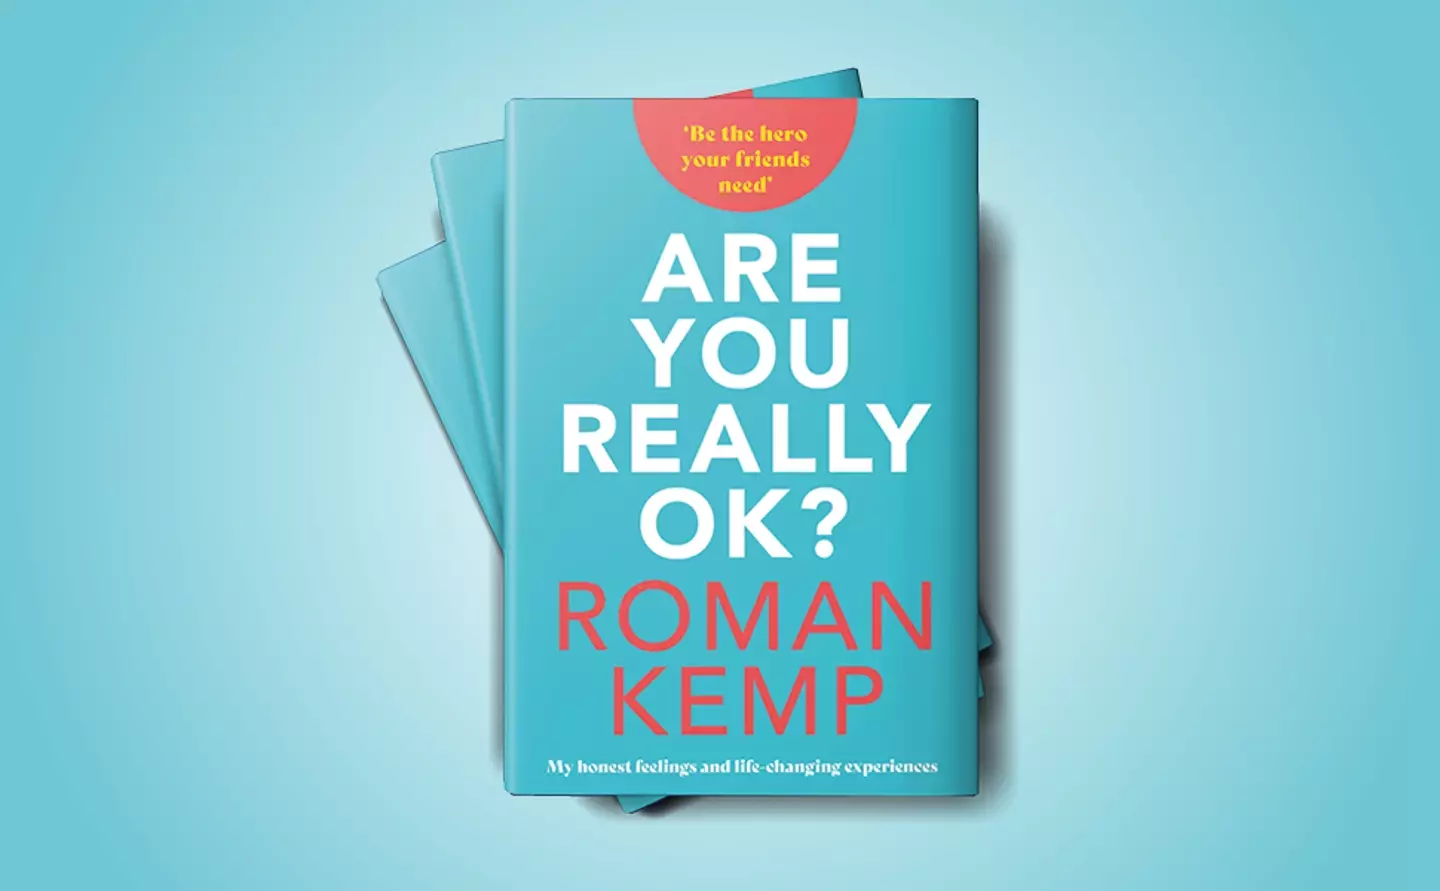 Roman Kemp's book will be published this year.